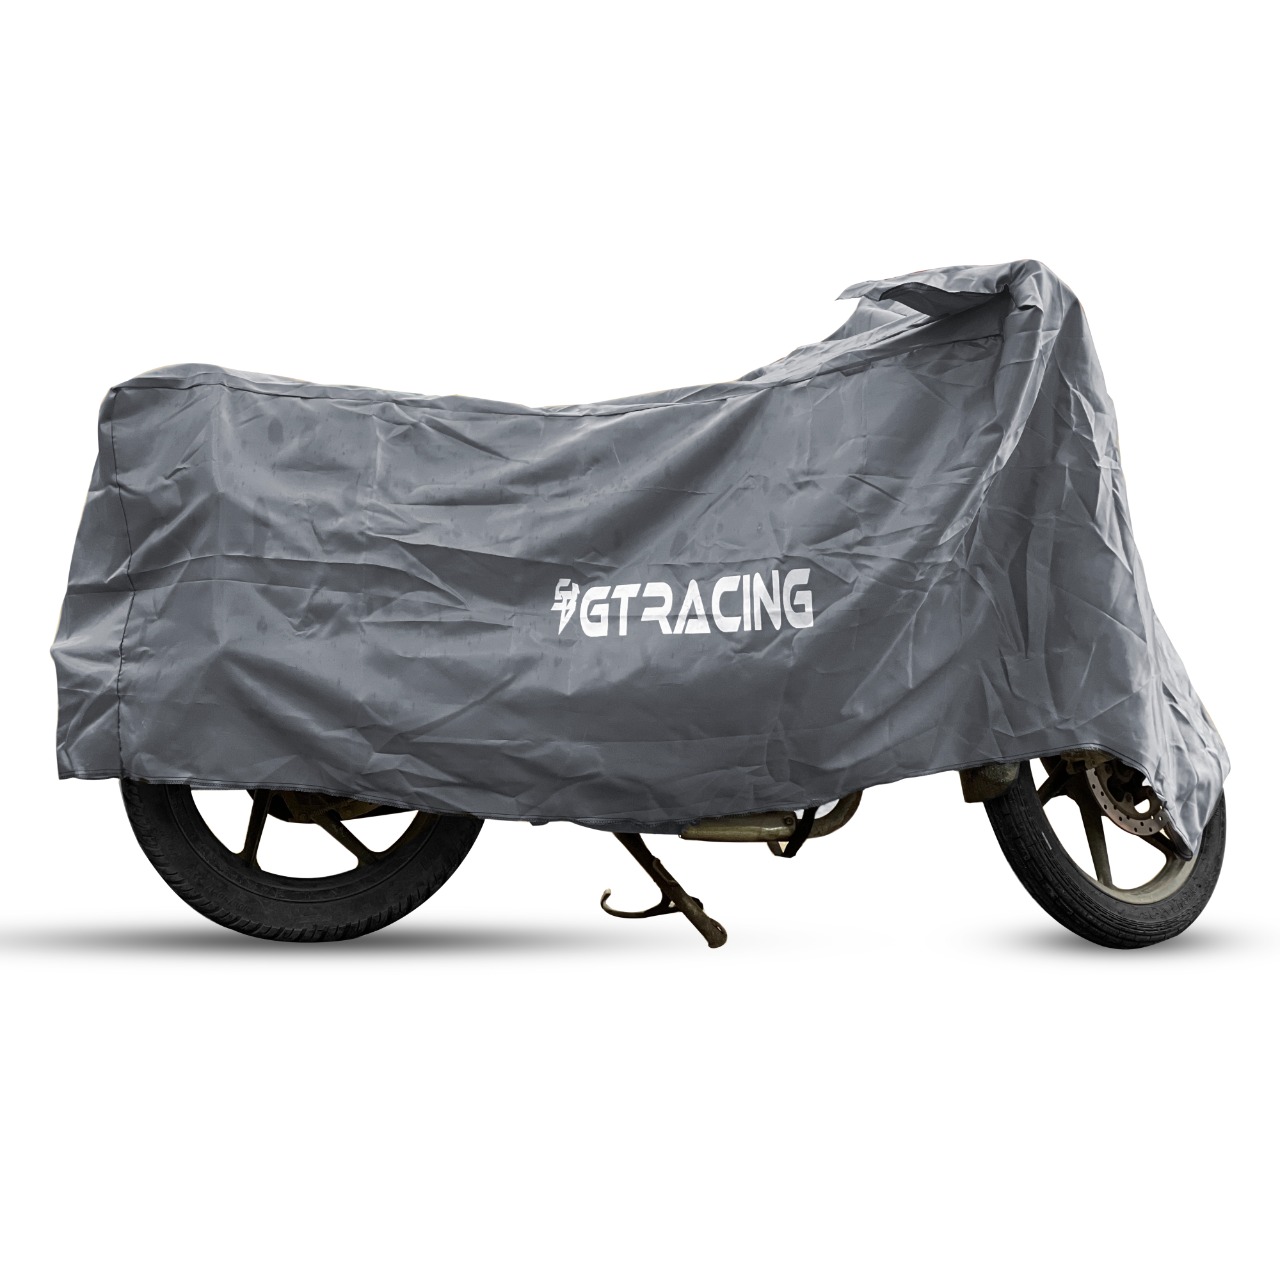 Steelbird Bike Cover GT Racing UV Protection Water-Resistant & Dustproof (2X2 Grey), Bike Body Cover with Carry Bag (All Bikes upto Pulsar 180cc Size)